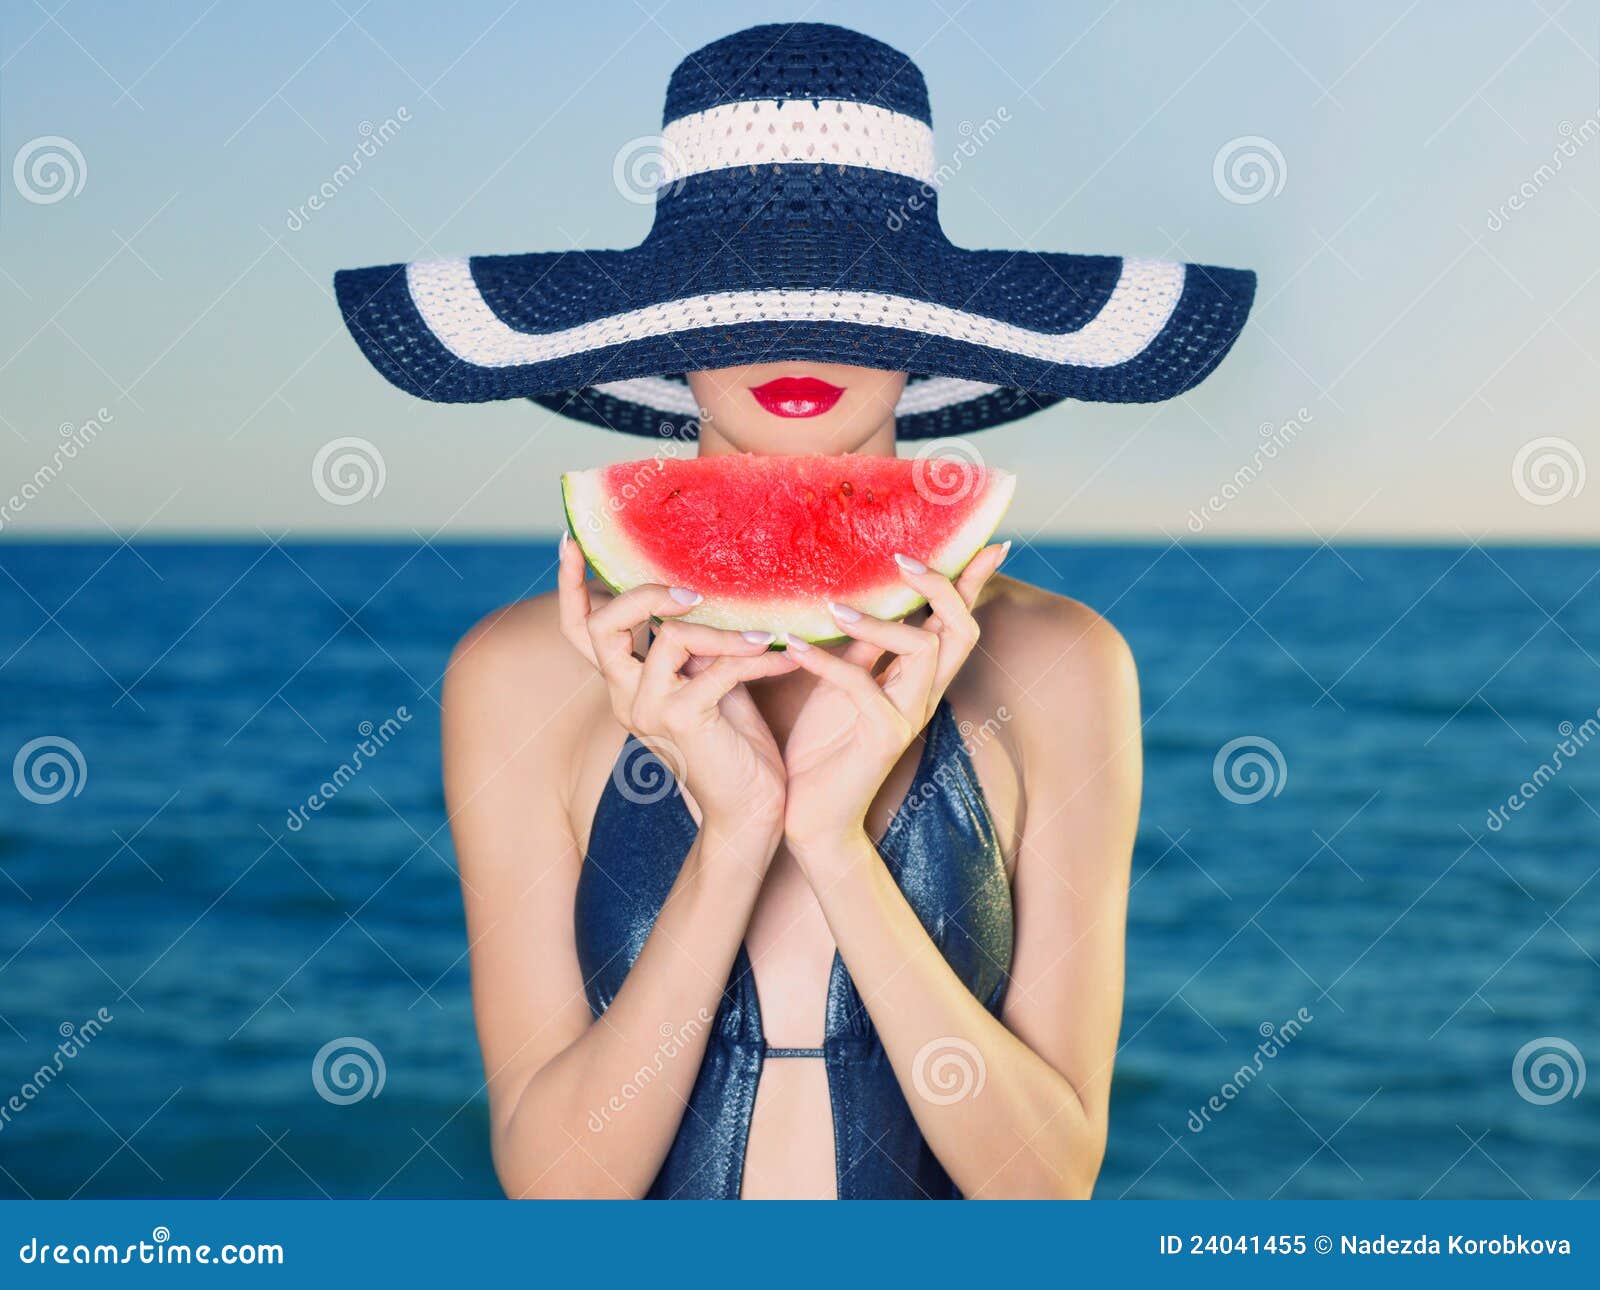 young lady at sea with watermelon